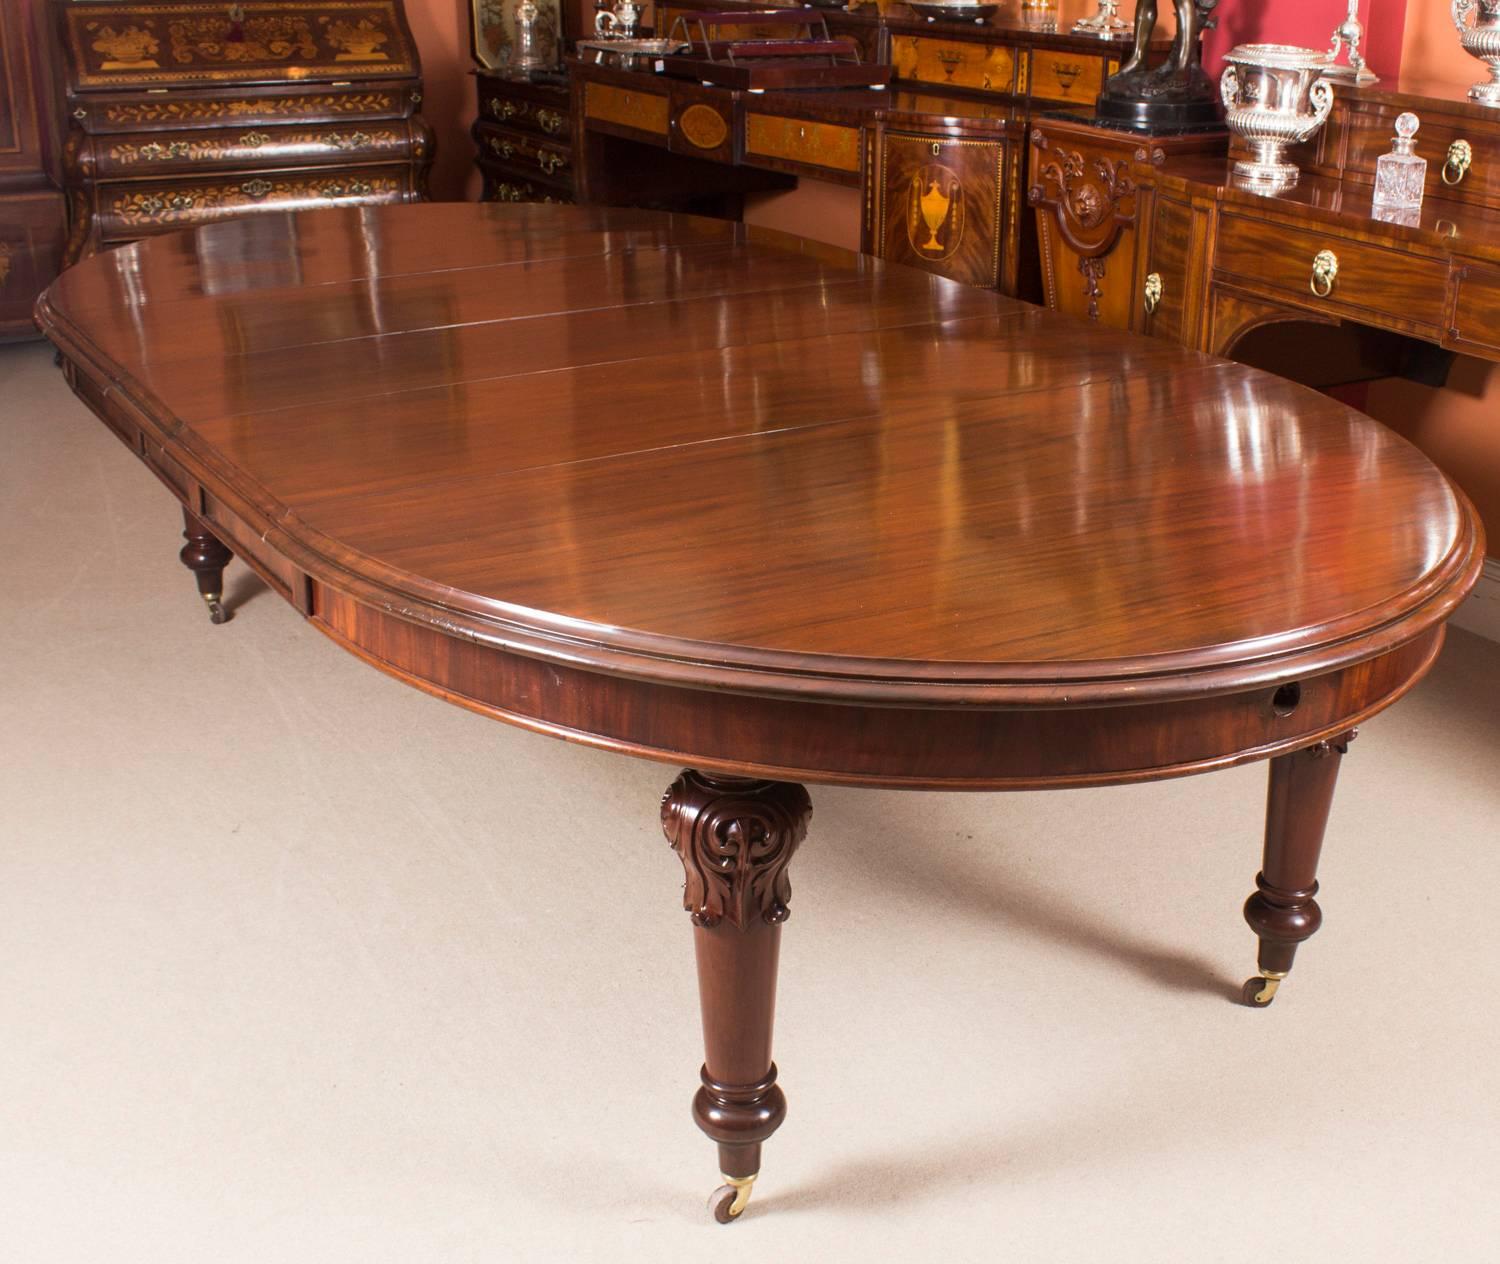 This is a fabulous antique Victorian oval solid mahogany extending dining table, circa 1850 in date and a bespoke set of ten dining chairs.

The table has three original leaves and can comfortably seat ten. It has been handcrafted from solid